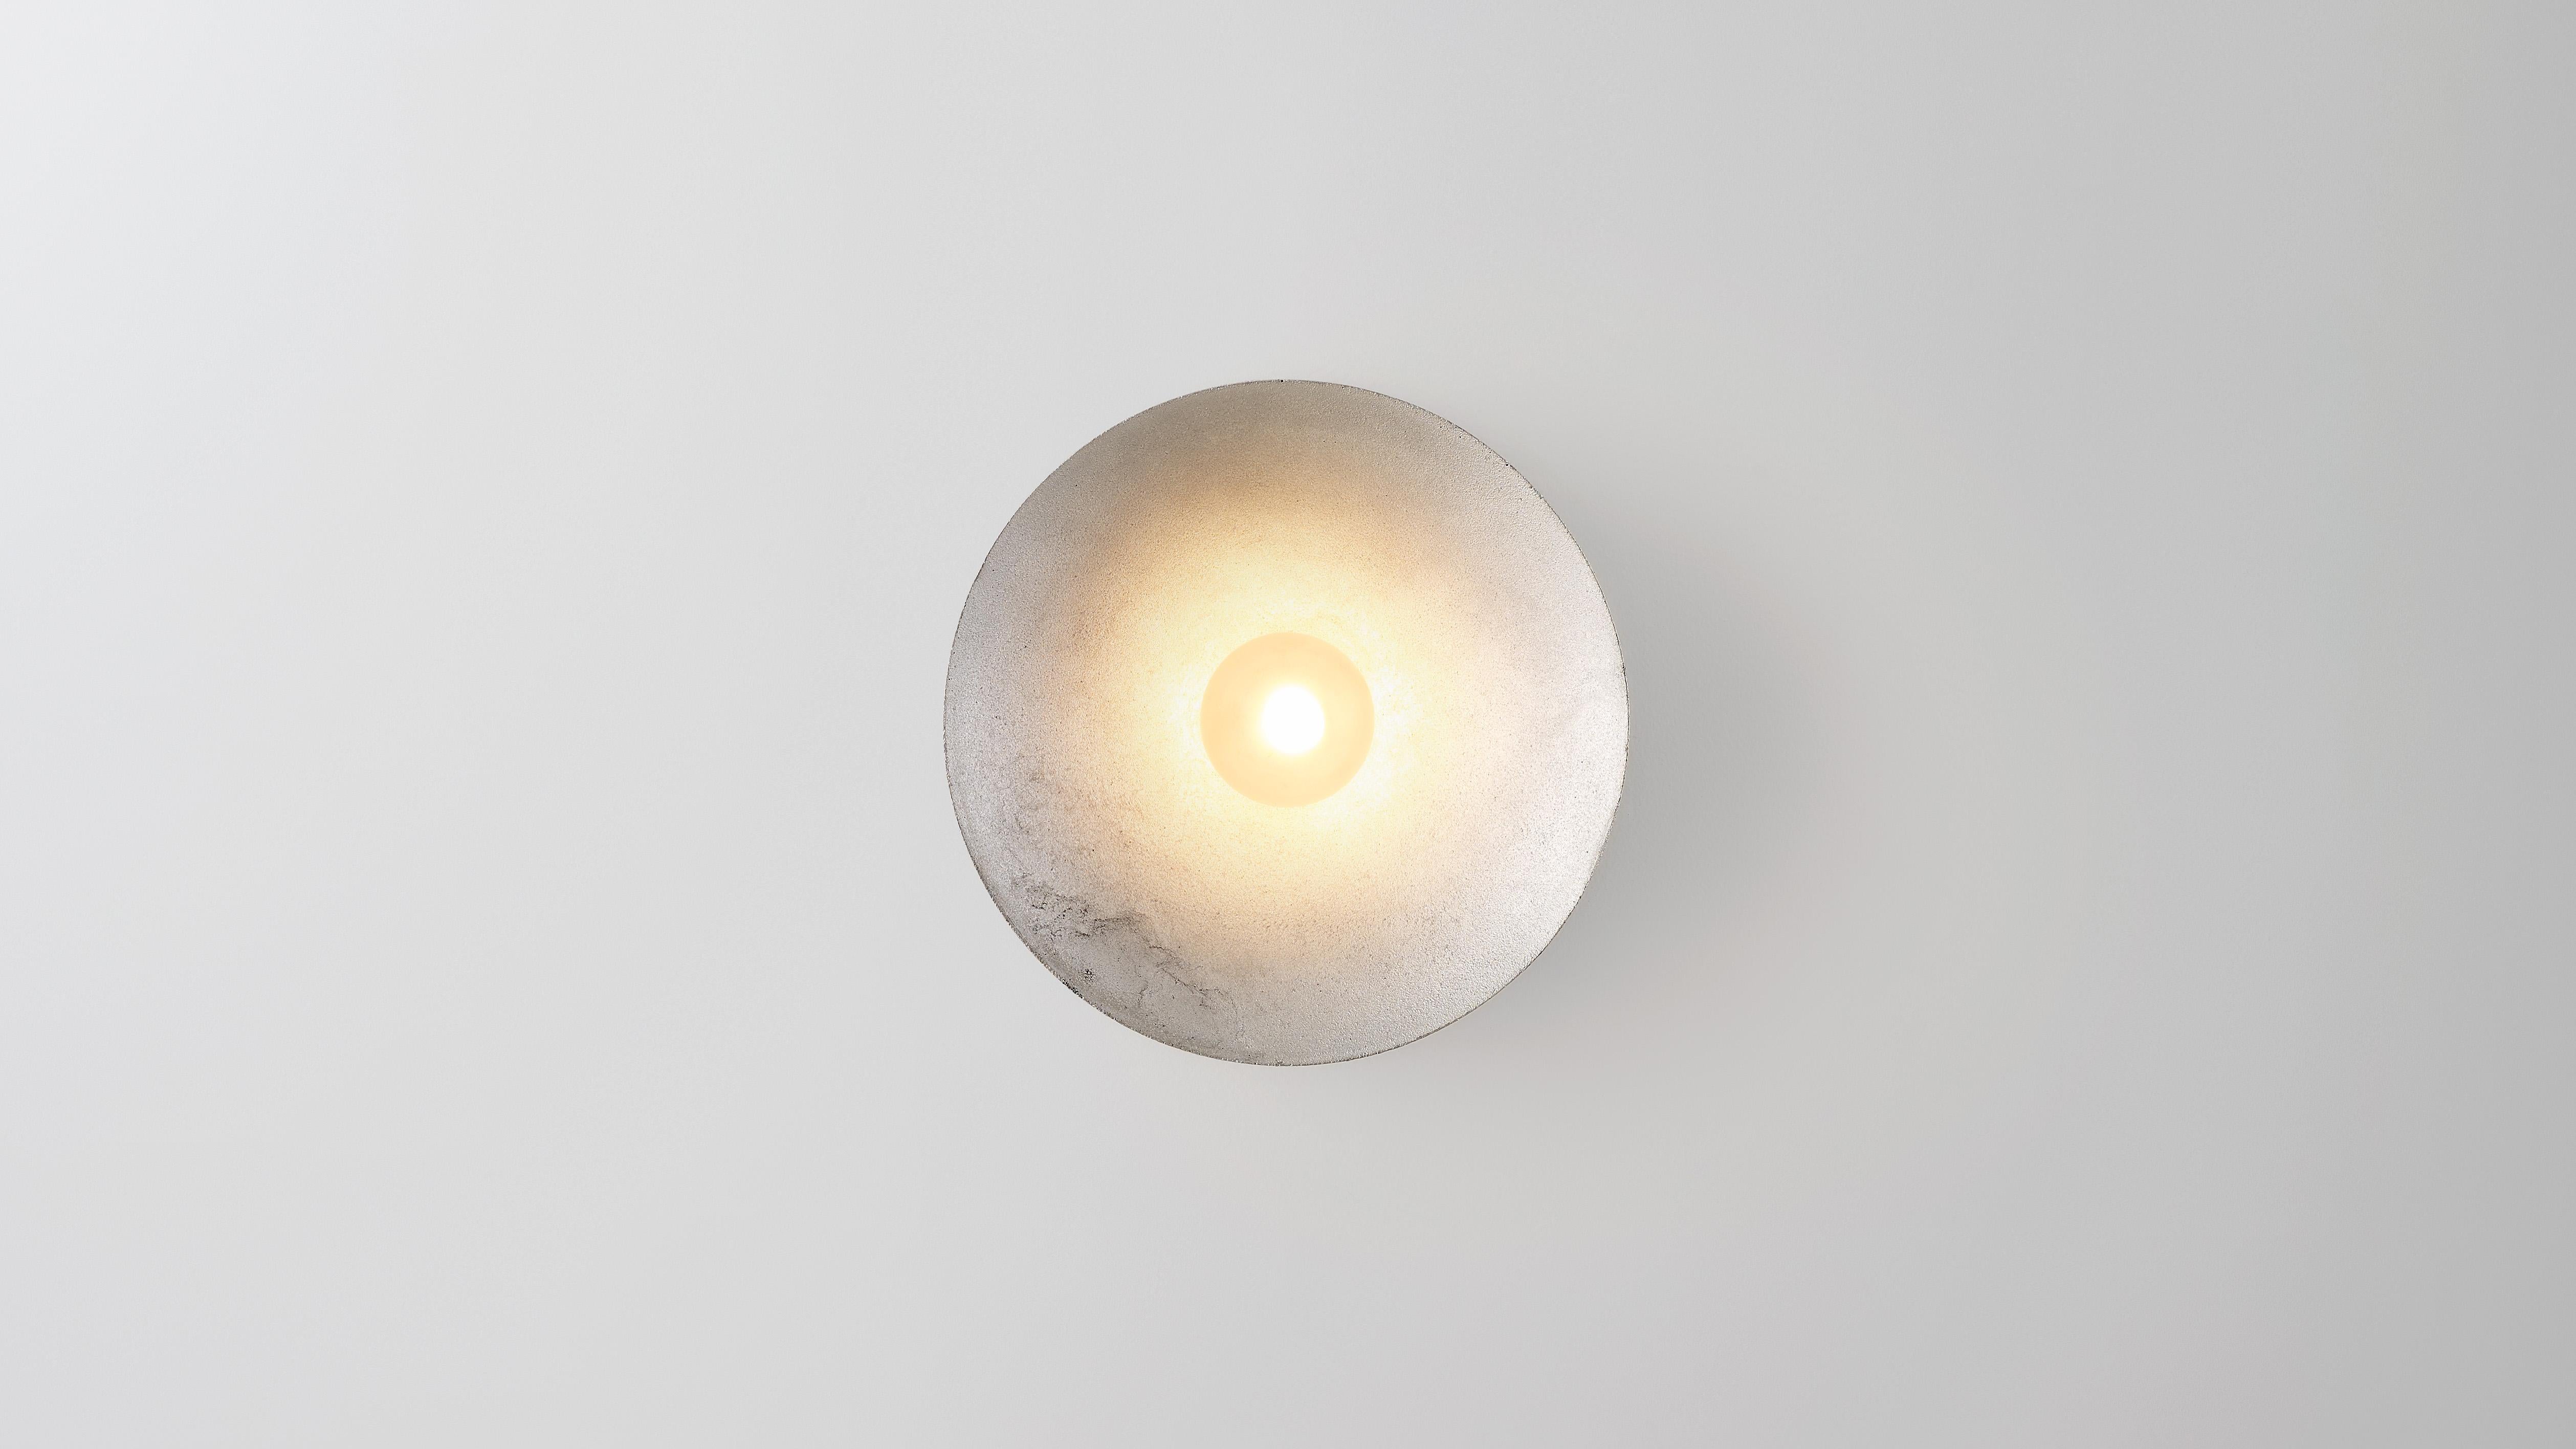 Aluminum Anton wall scounce by Volker Haug
Dimensions: Diameter 18 cm x Depth 10.3 cm 
Material: Cast Aluminum.
Finish: Raw
Lamp: G9 LED (240V / 120V US). 12V option is available.
Glass Bulb: 45mm ø, Frosted
Weight: 1.5kg